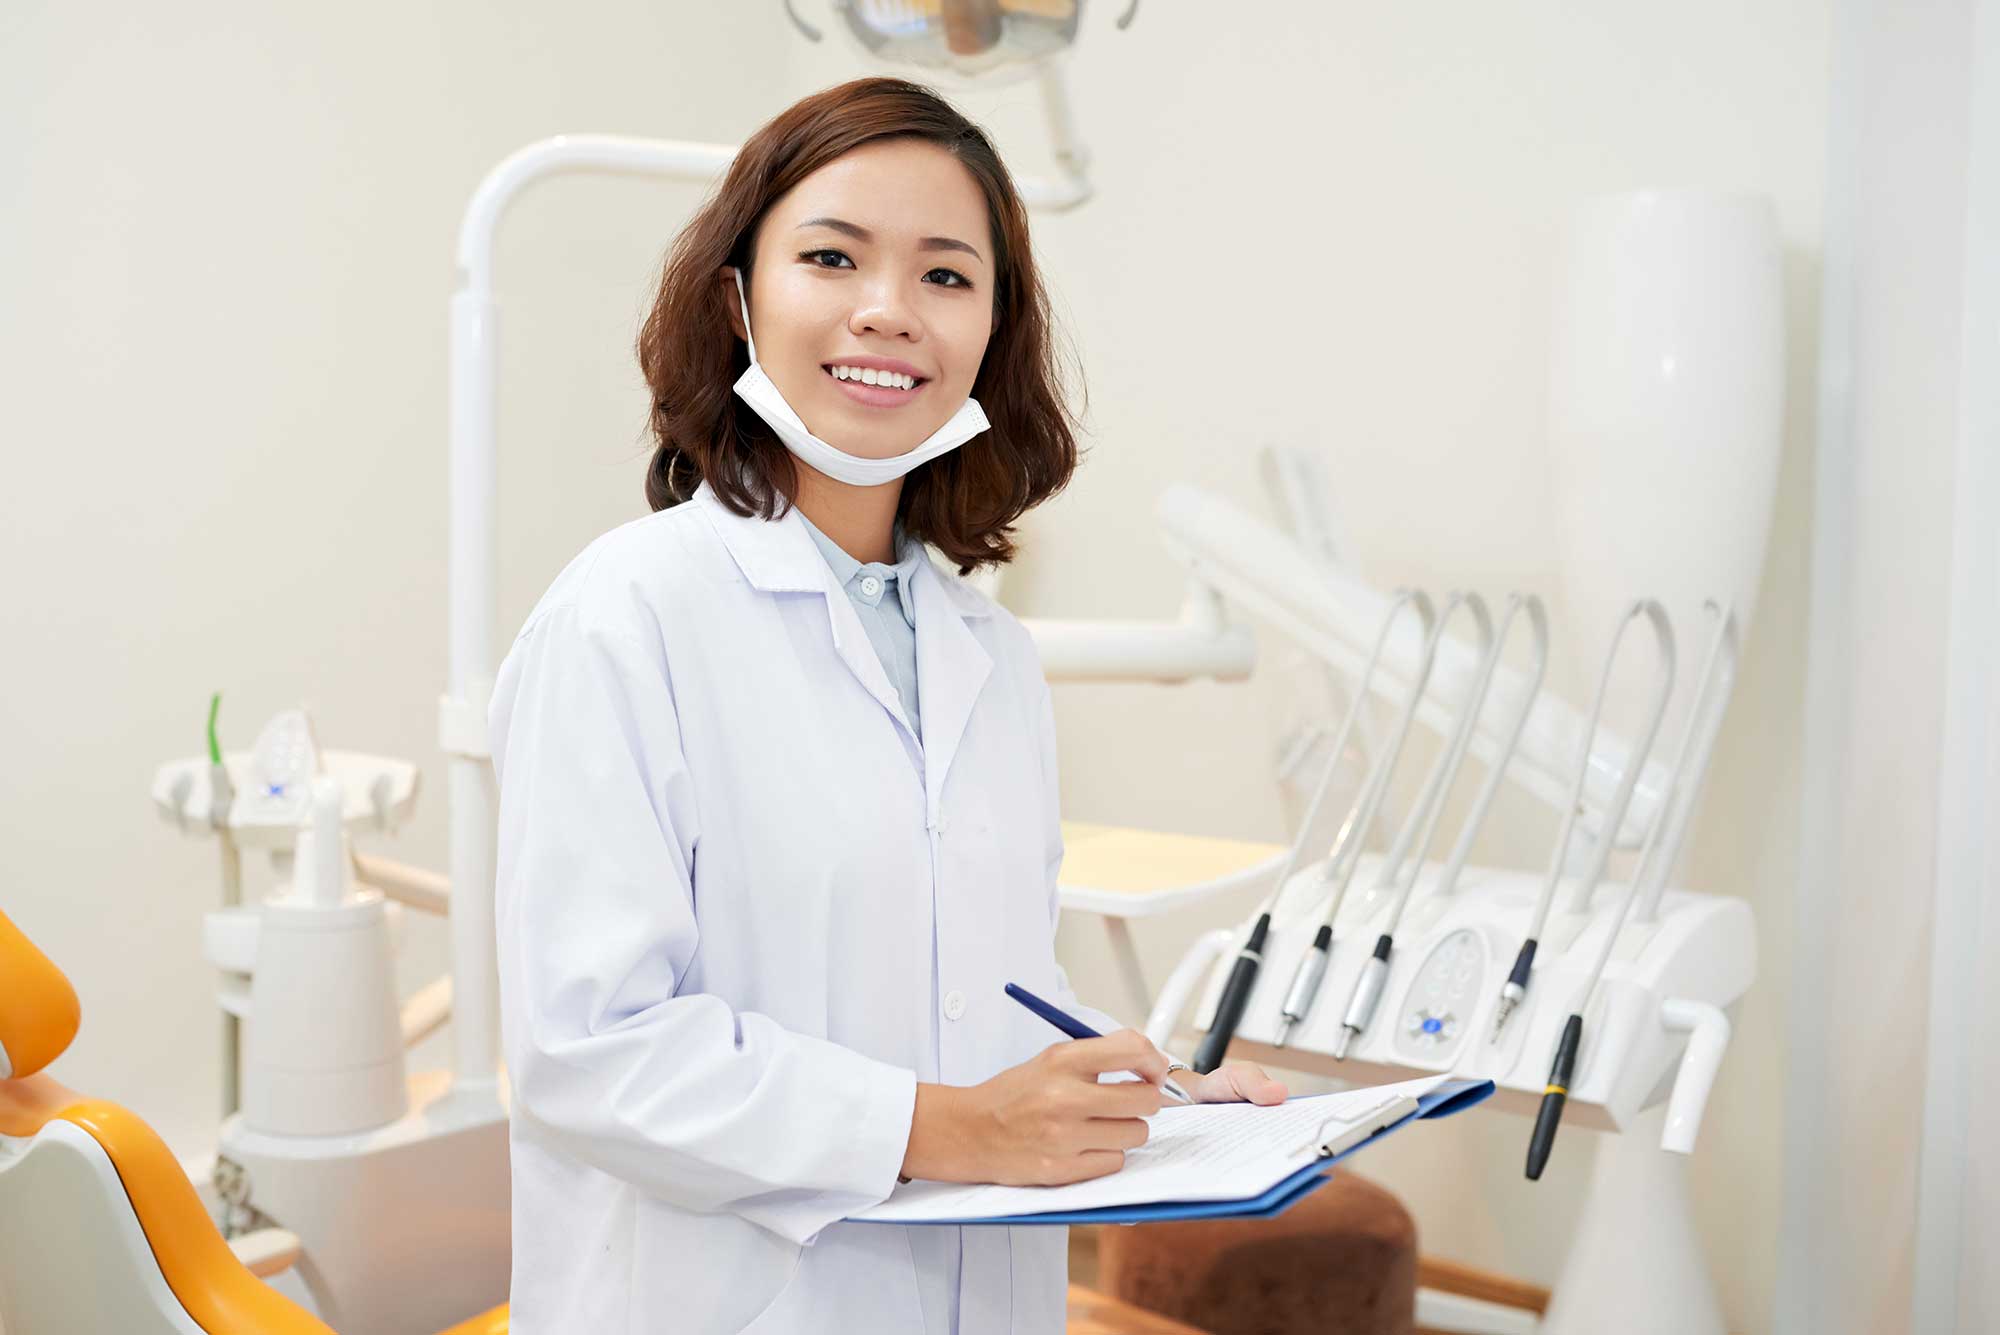 Female young dentist smiling